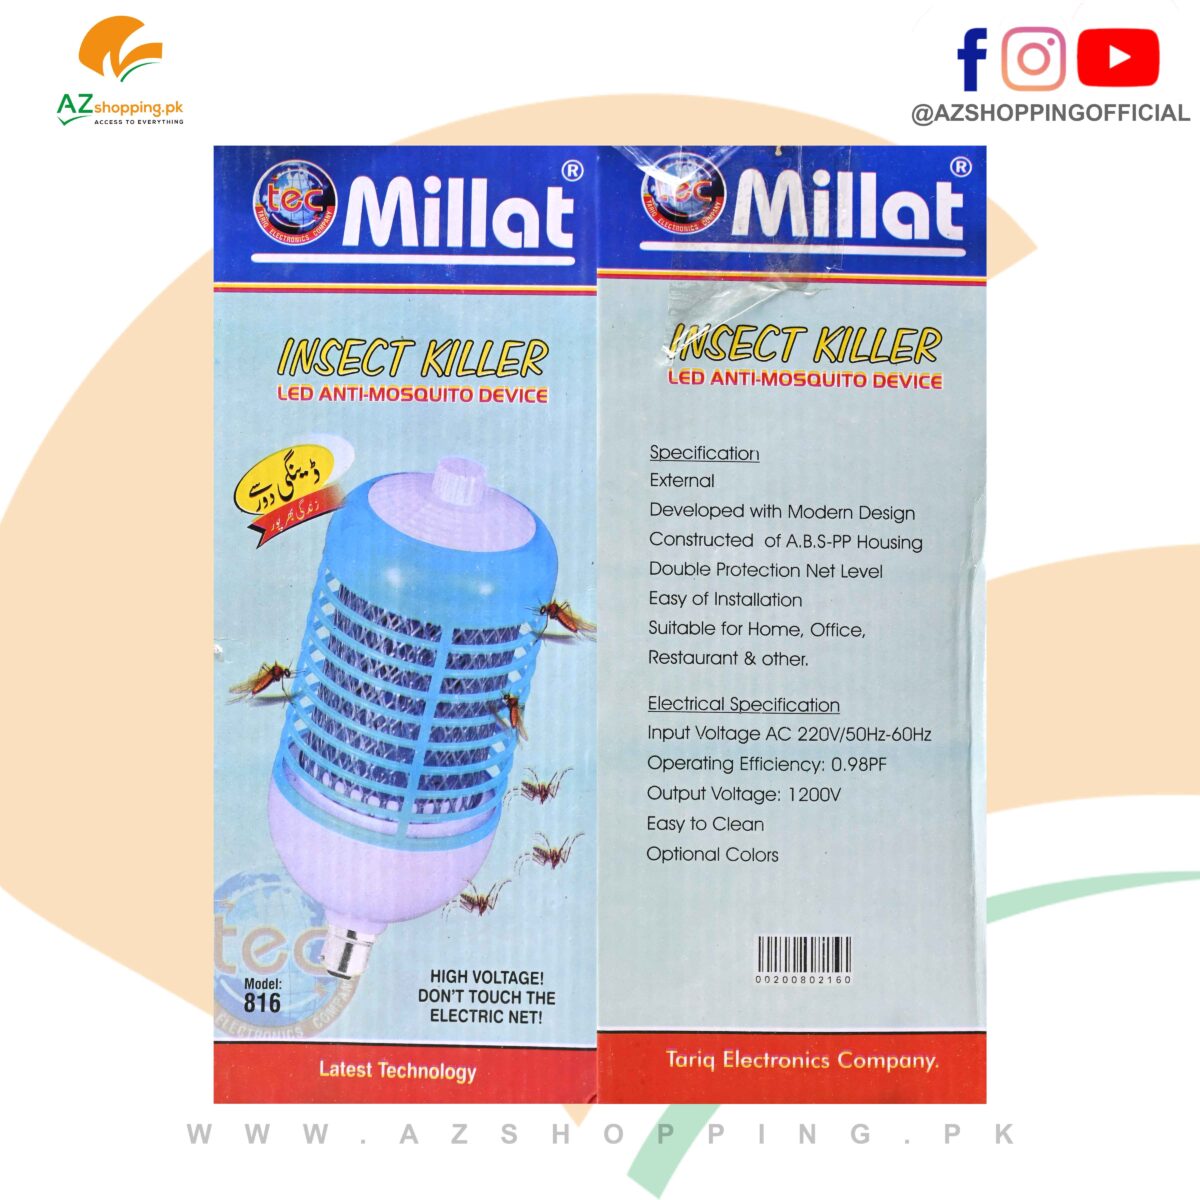 Millat – 10 inches Insect Killer Led Anti-Mosquito Device with Blue LED Light – 220V/50Hz - Model: 816